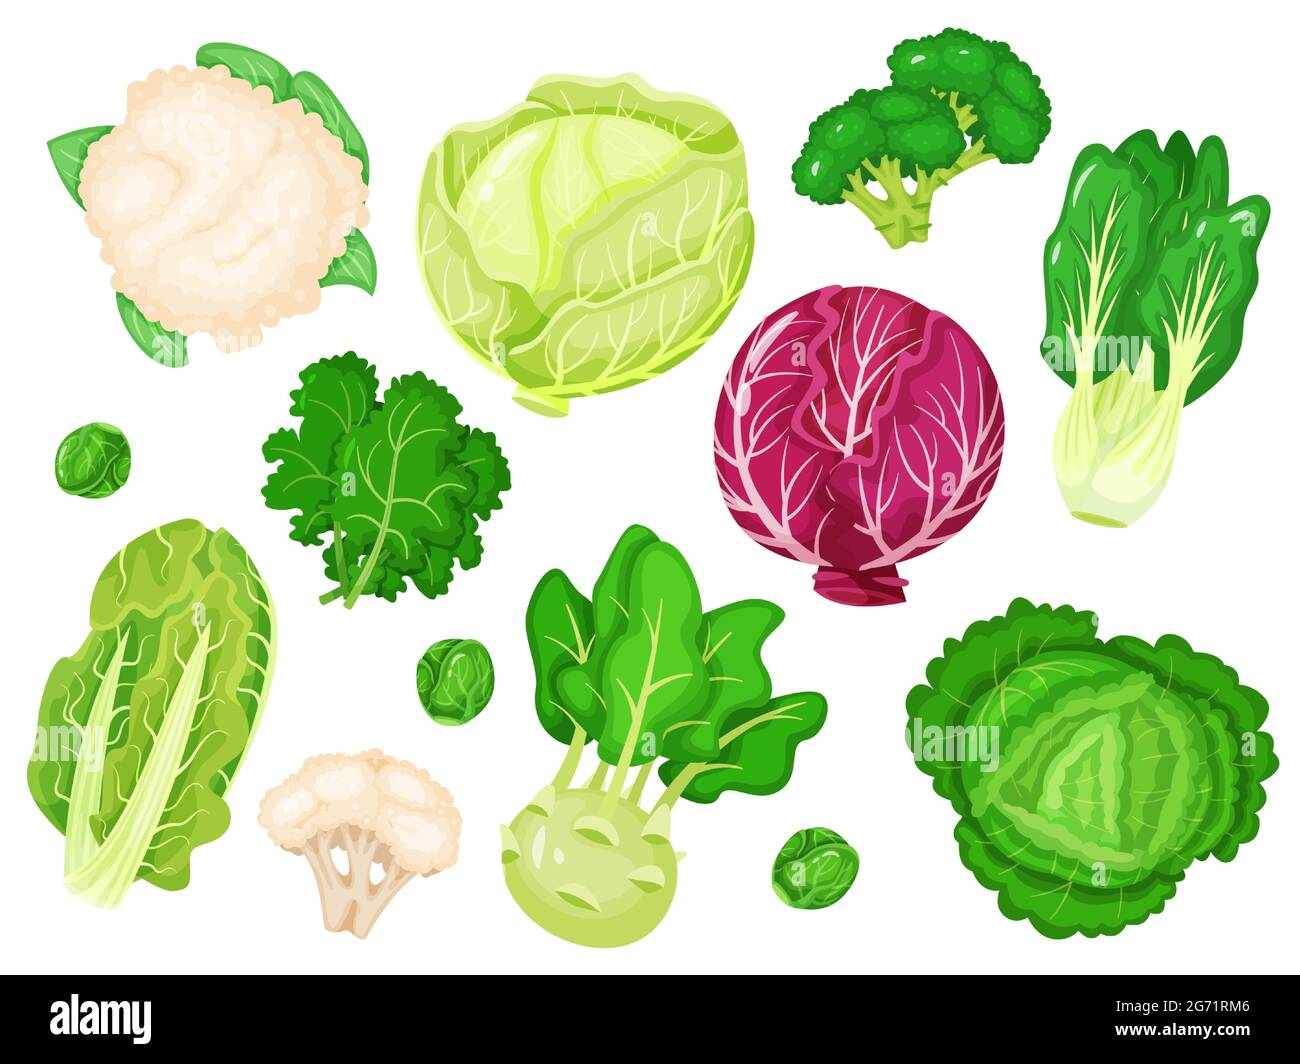 Cartoon cabbages. Fresh lettuce, broccoli, kale leaves, cauliflower, white and red cabbage. Various types of healthy green vegetables vector set. Farm, organic greenery as romaine and Brussels sprout Stock Vector